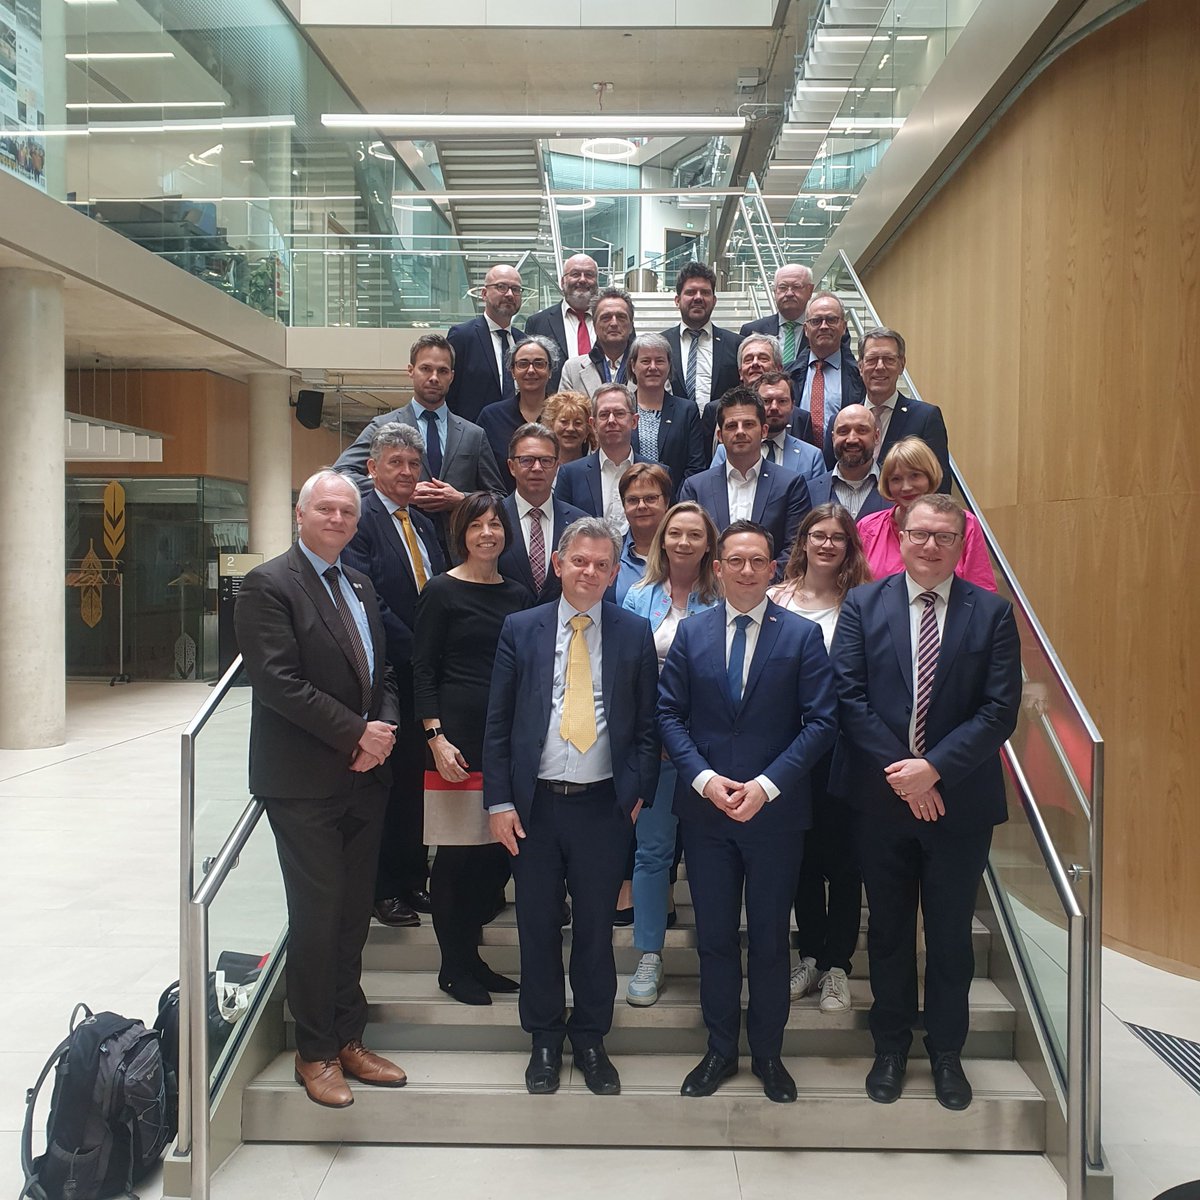 Today we were delighted to welcome a delegation from the Lower Saxony State in Germany, including representatives from Government, Parliament & the HE sector. @UofGMVLS & Hannover Medical School signed an MoU and we look forward to further developing collaborations in research.